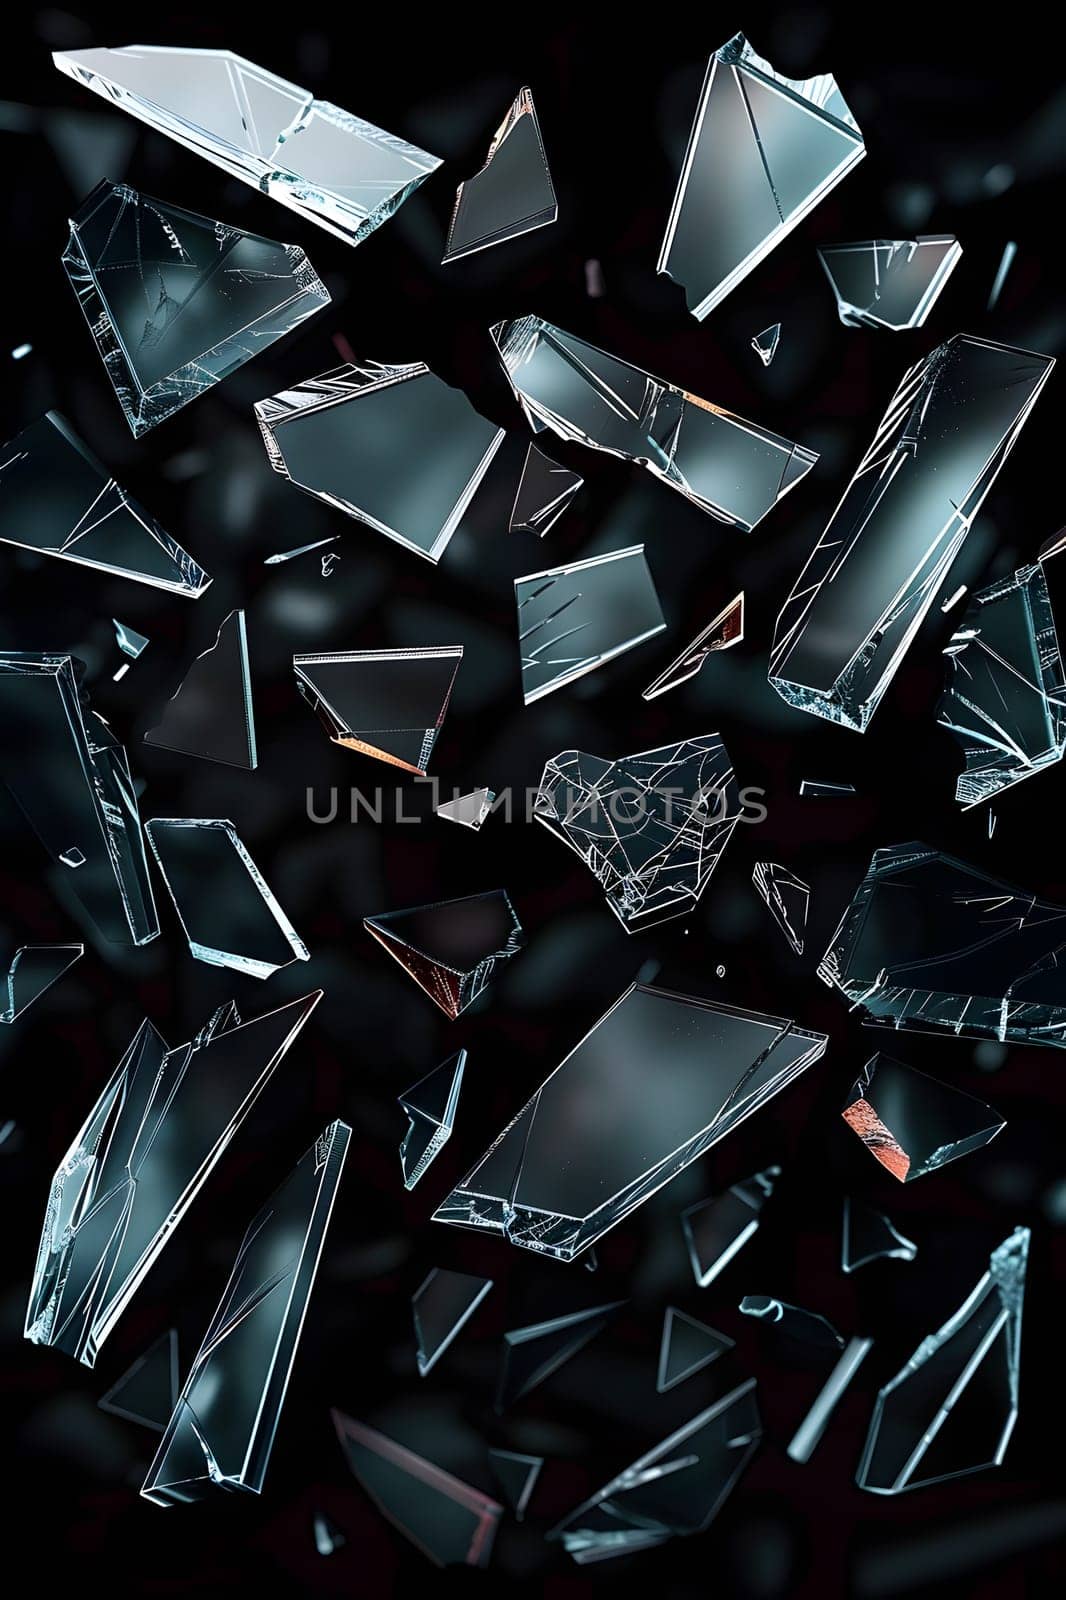 A shattered automotive tire rim lies on a black background, forming a triangular pattern of metal pieces. The symmetry of the aluminum rectangles creates a unique automotive wheel system design